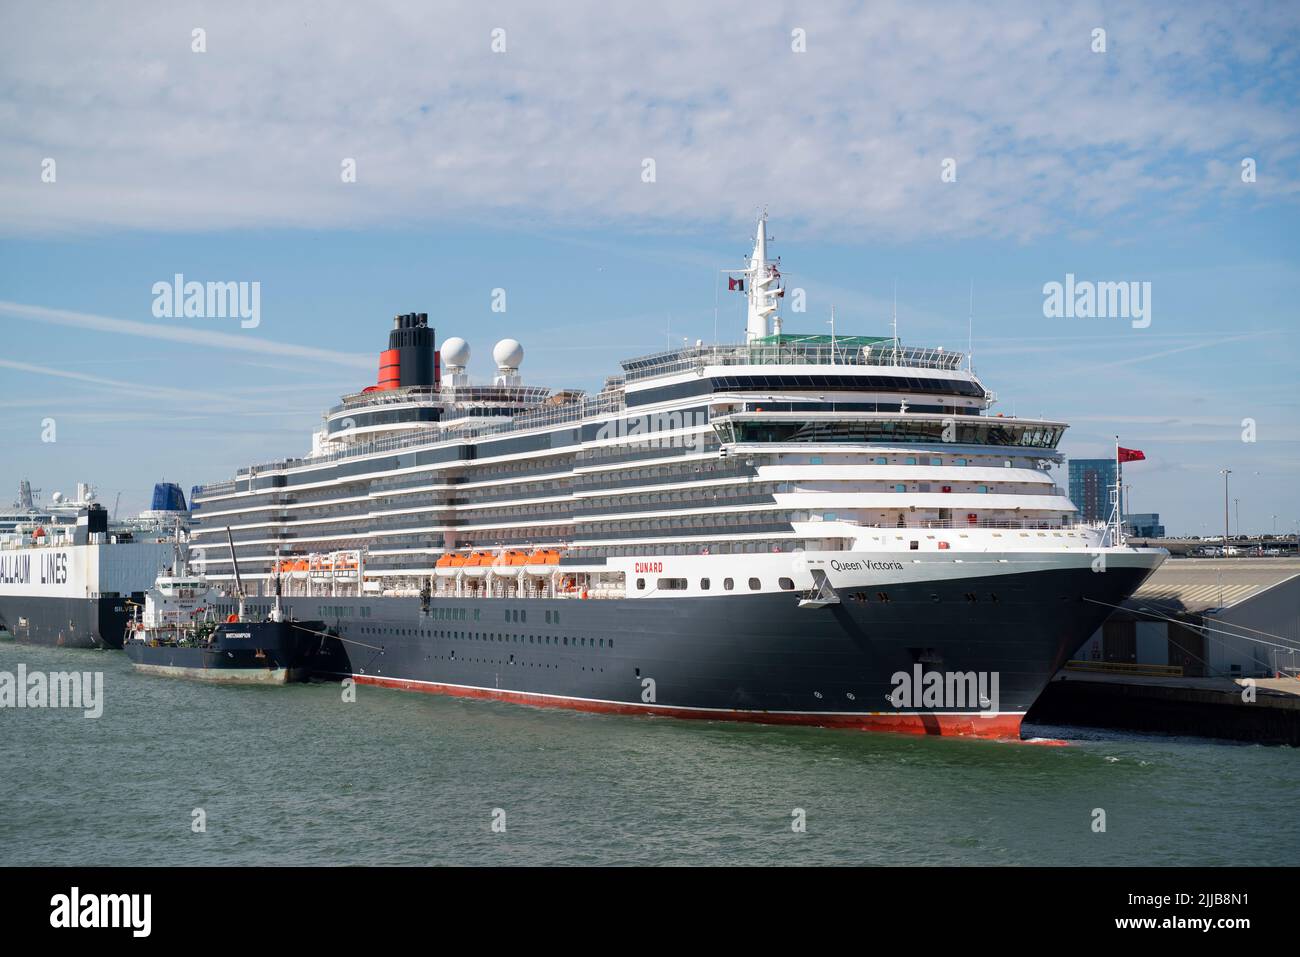 The MS Queen Victoria, a Vista-class cruise ship operated by Cunard, docked in Southampton Docks harbourside. Stock Photo